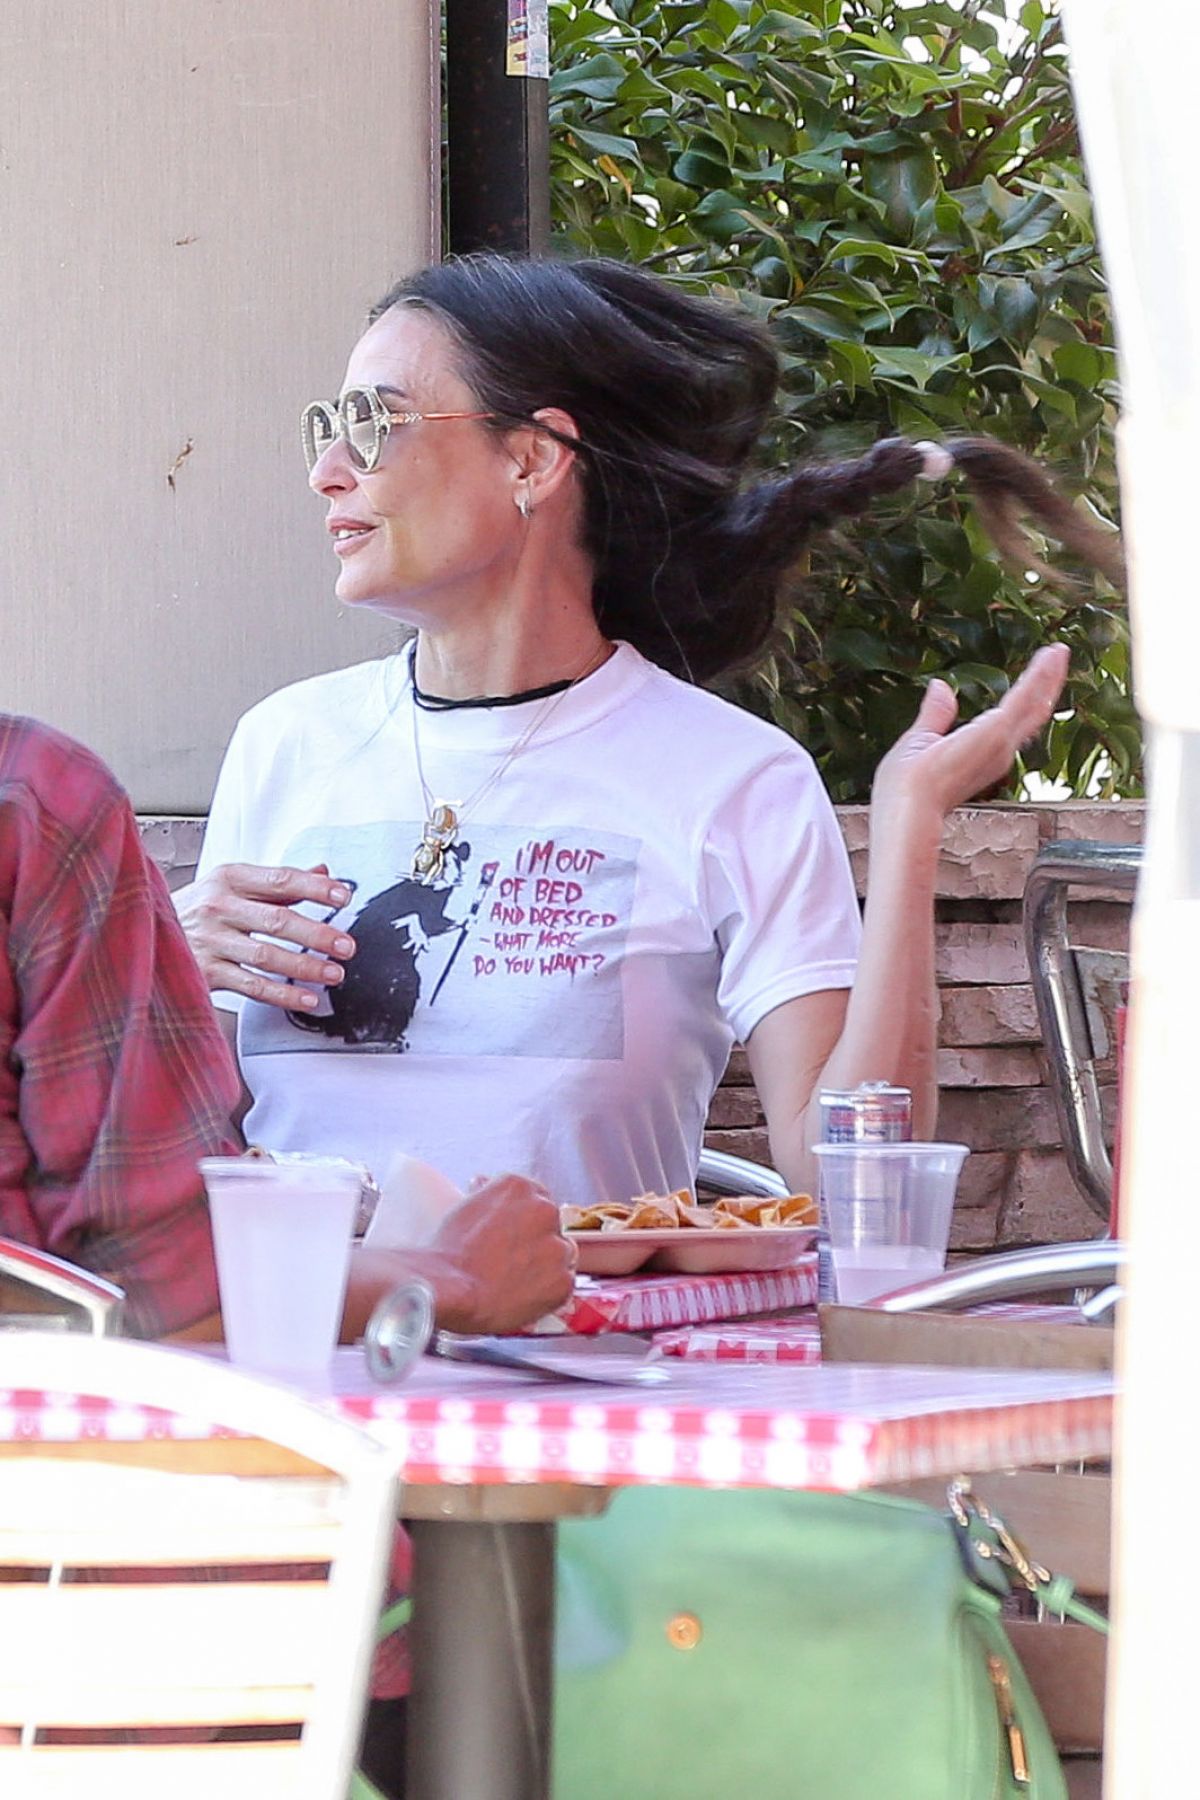 DEMI MOORE at Pinches Tacos in West Hollywood 06/04/2016 – HawtCelebs